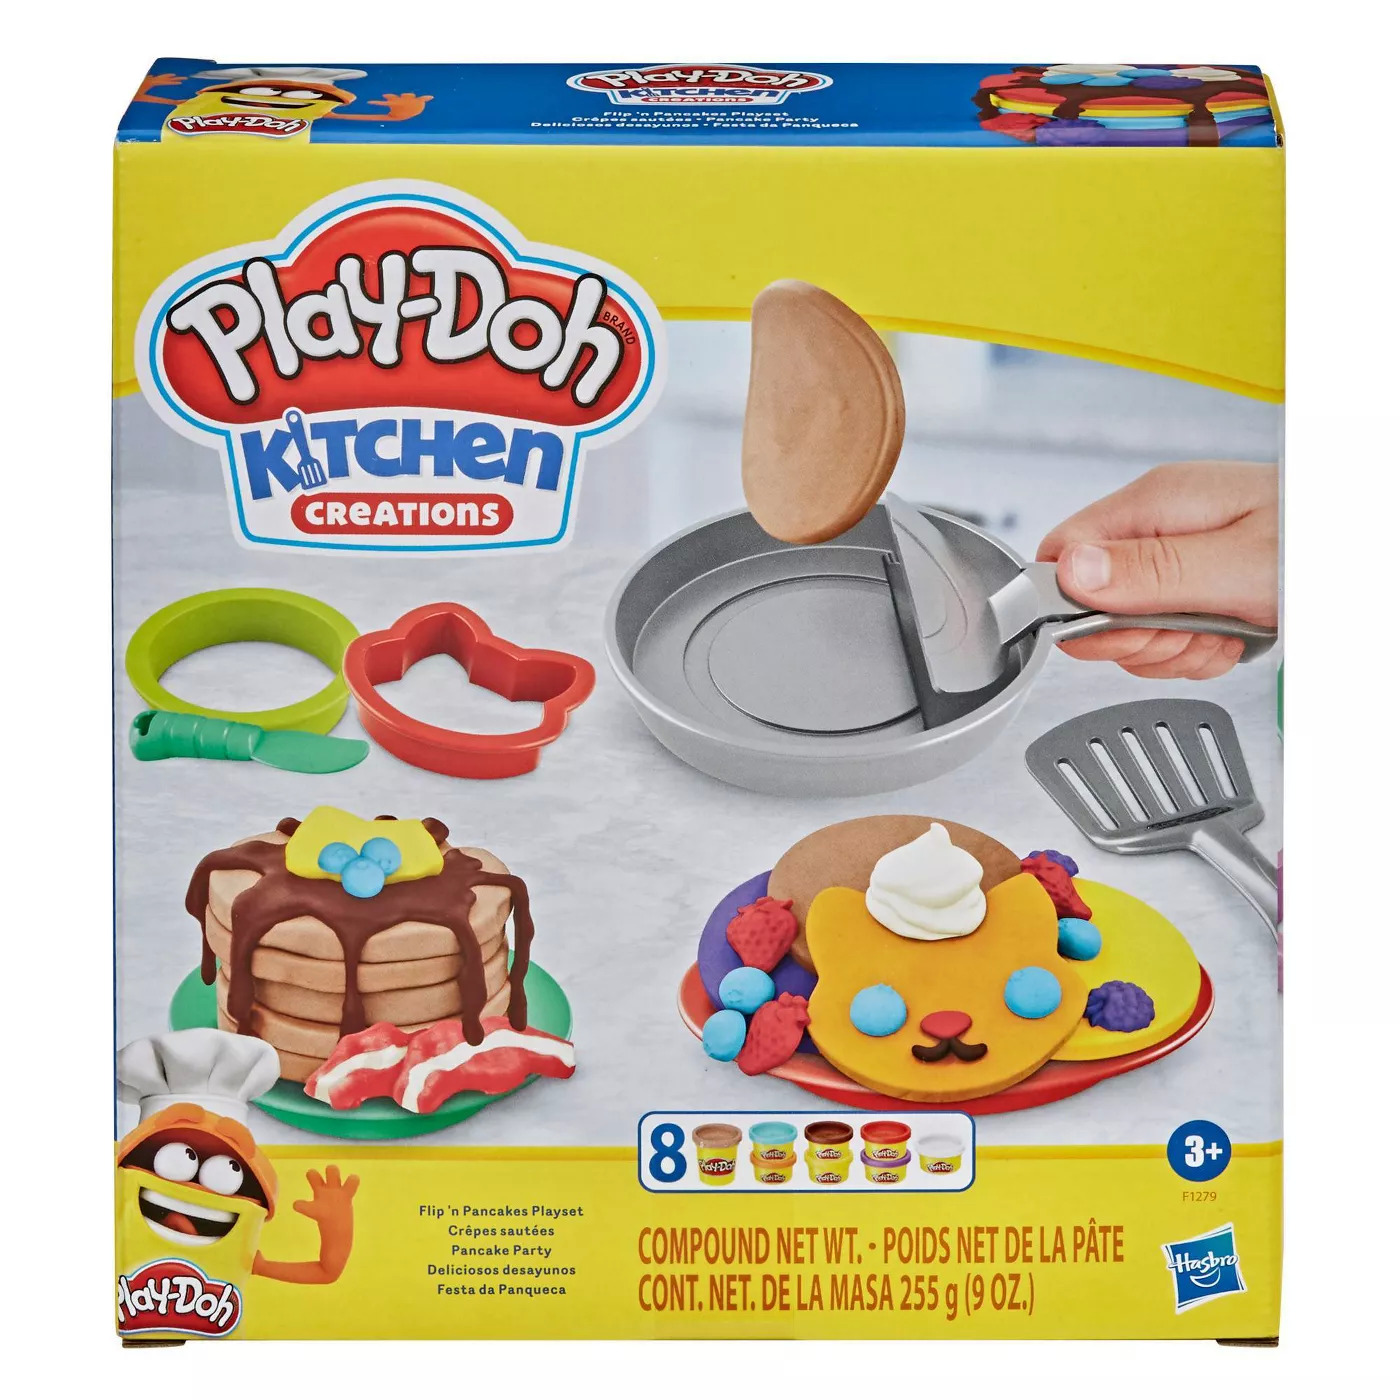 Play-Doh: Kitchen Creations Flip 'n Pancakes Playset $5.87 + FS w/ Amazon Prime or FS on $25+